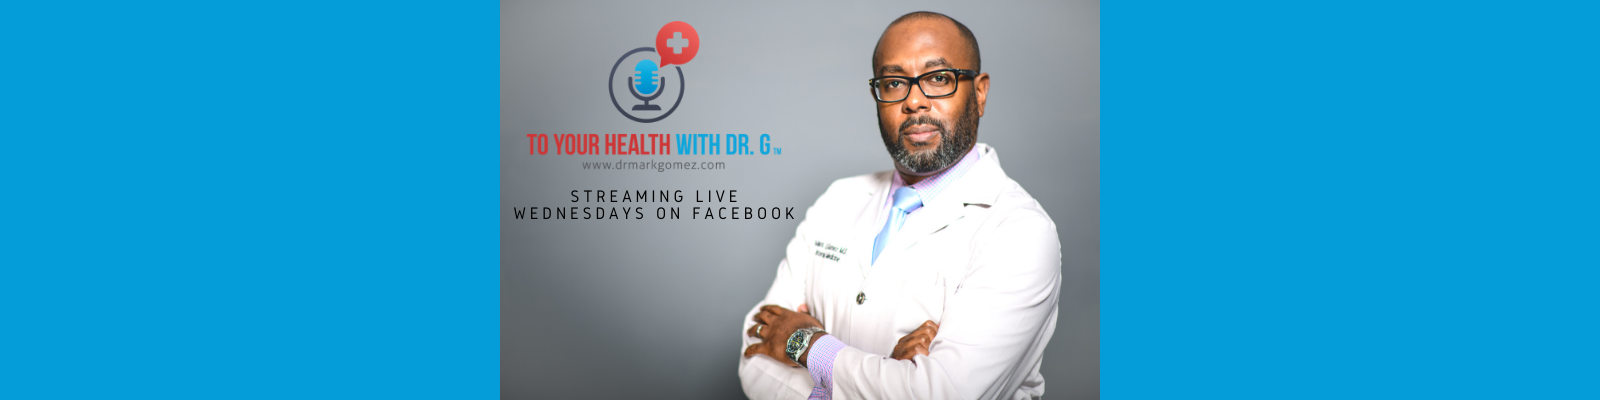 TO YOUR HEALTH WITH DR. G™